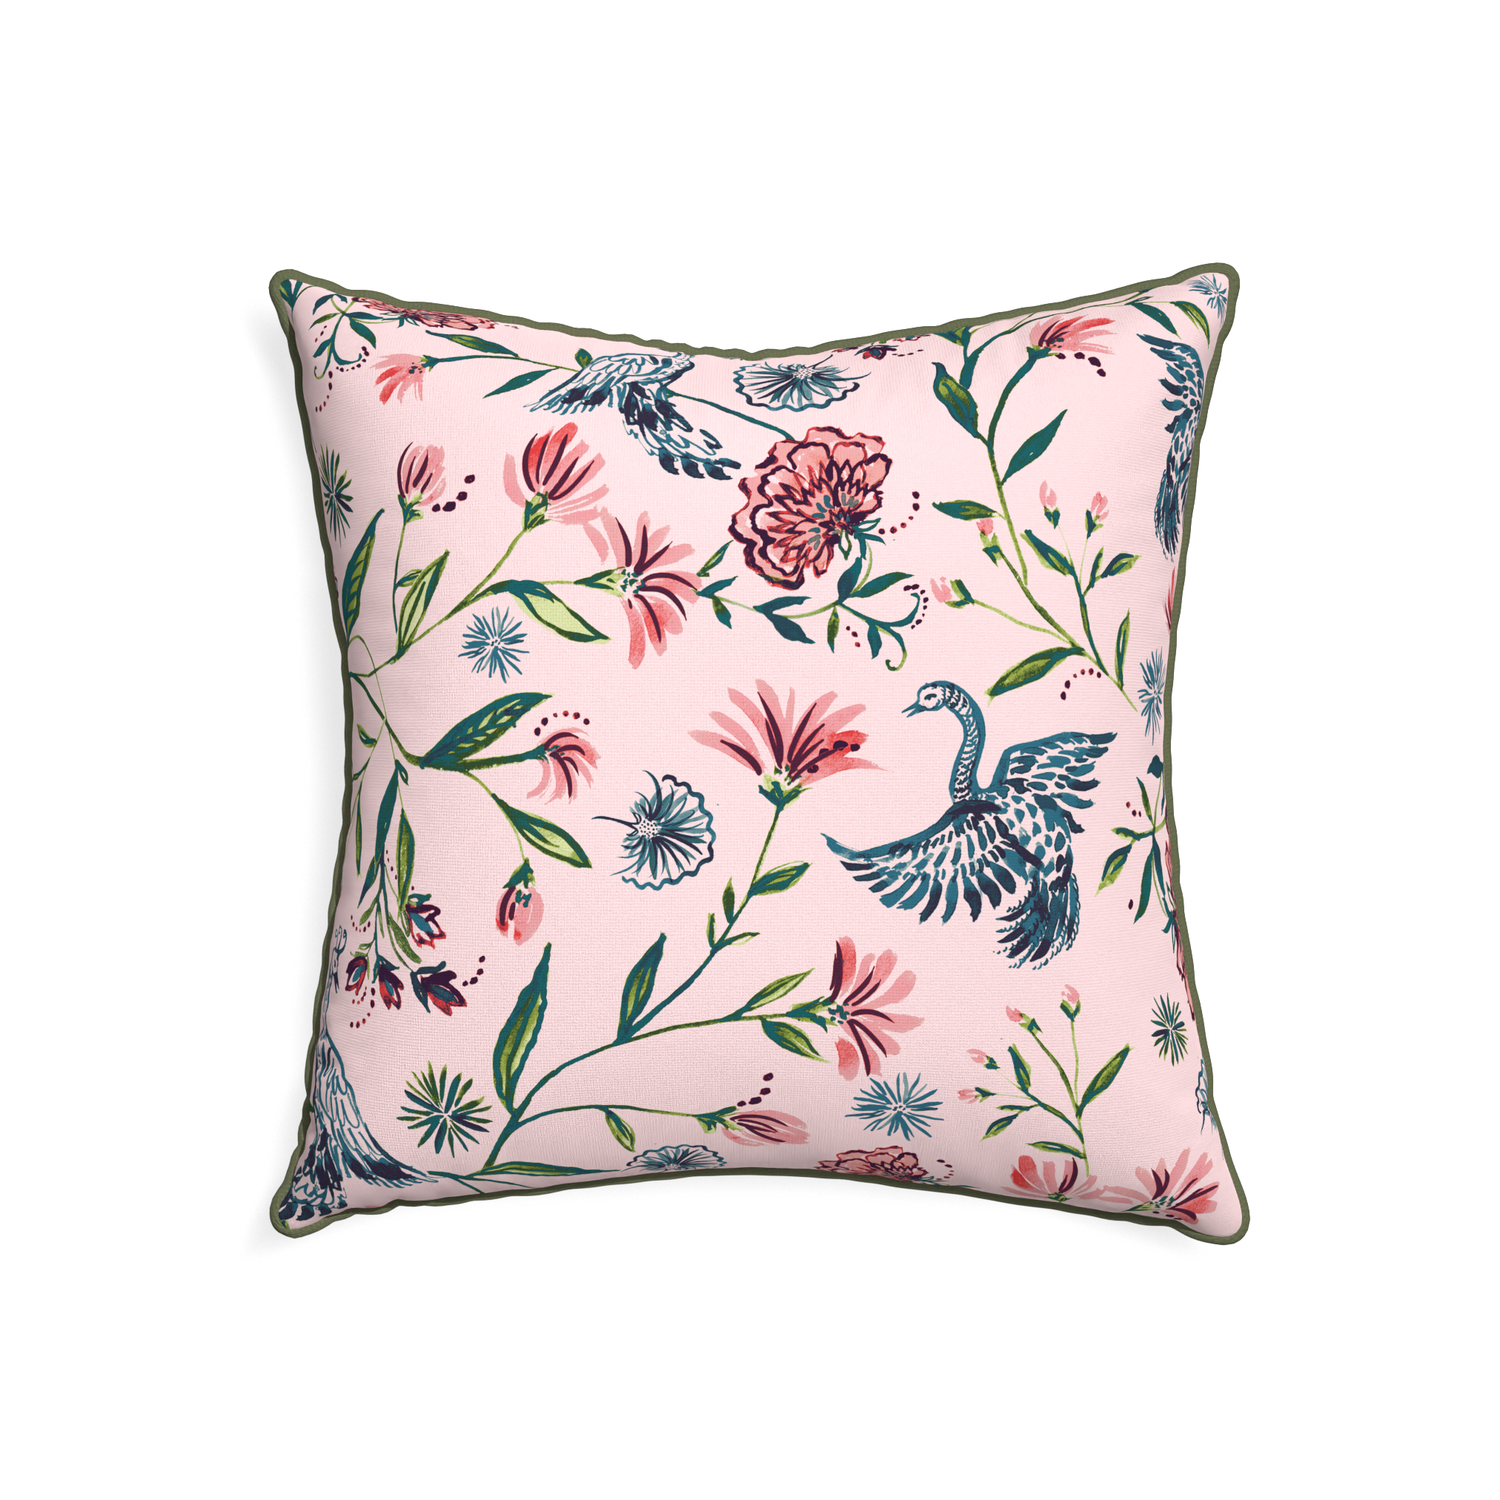 22-square daphne rose custom pillow with f piping on white background